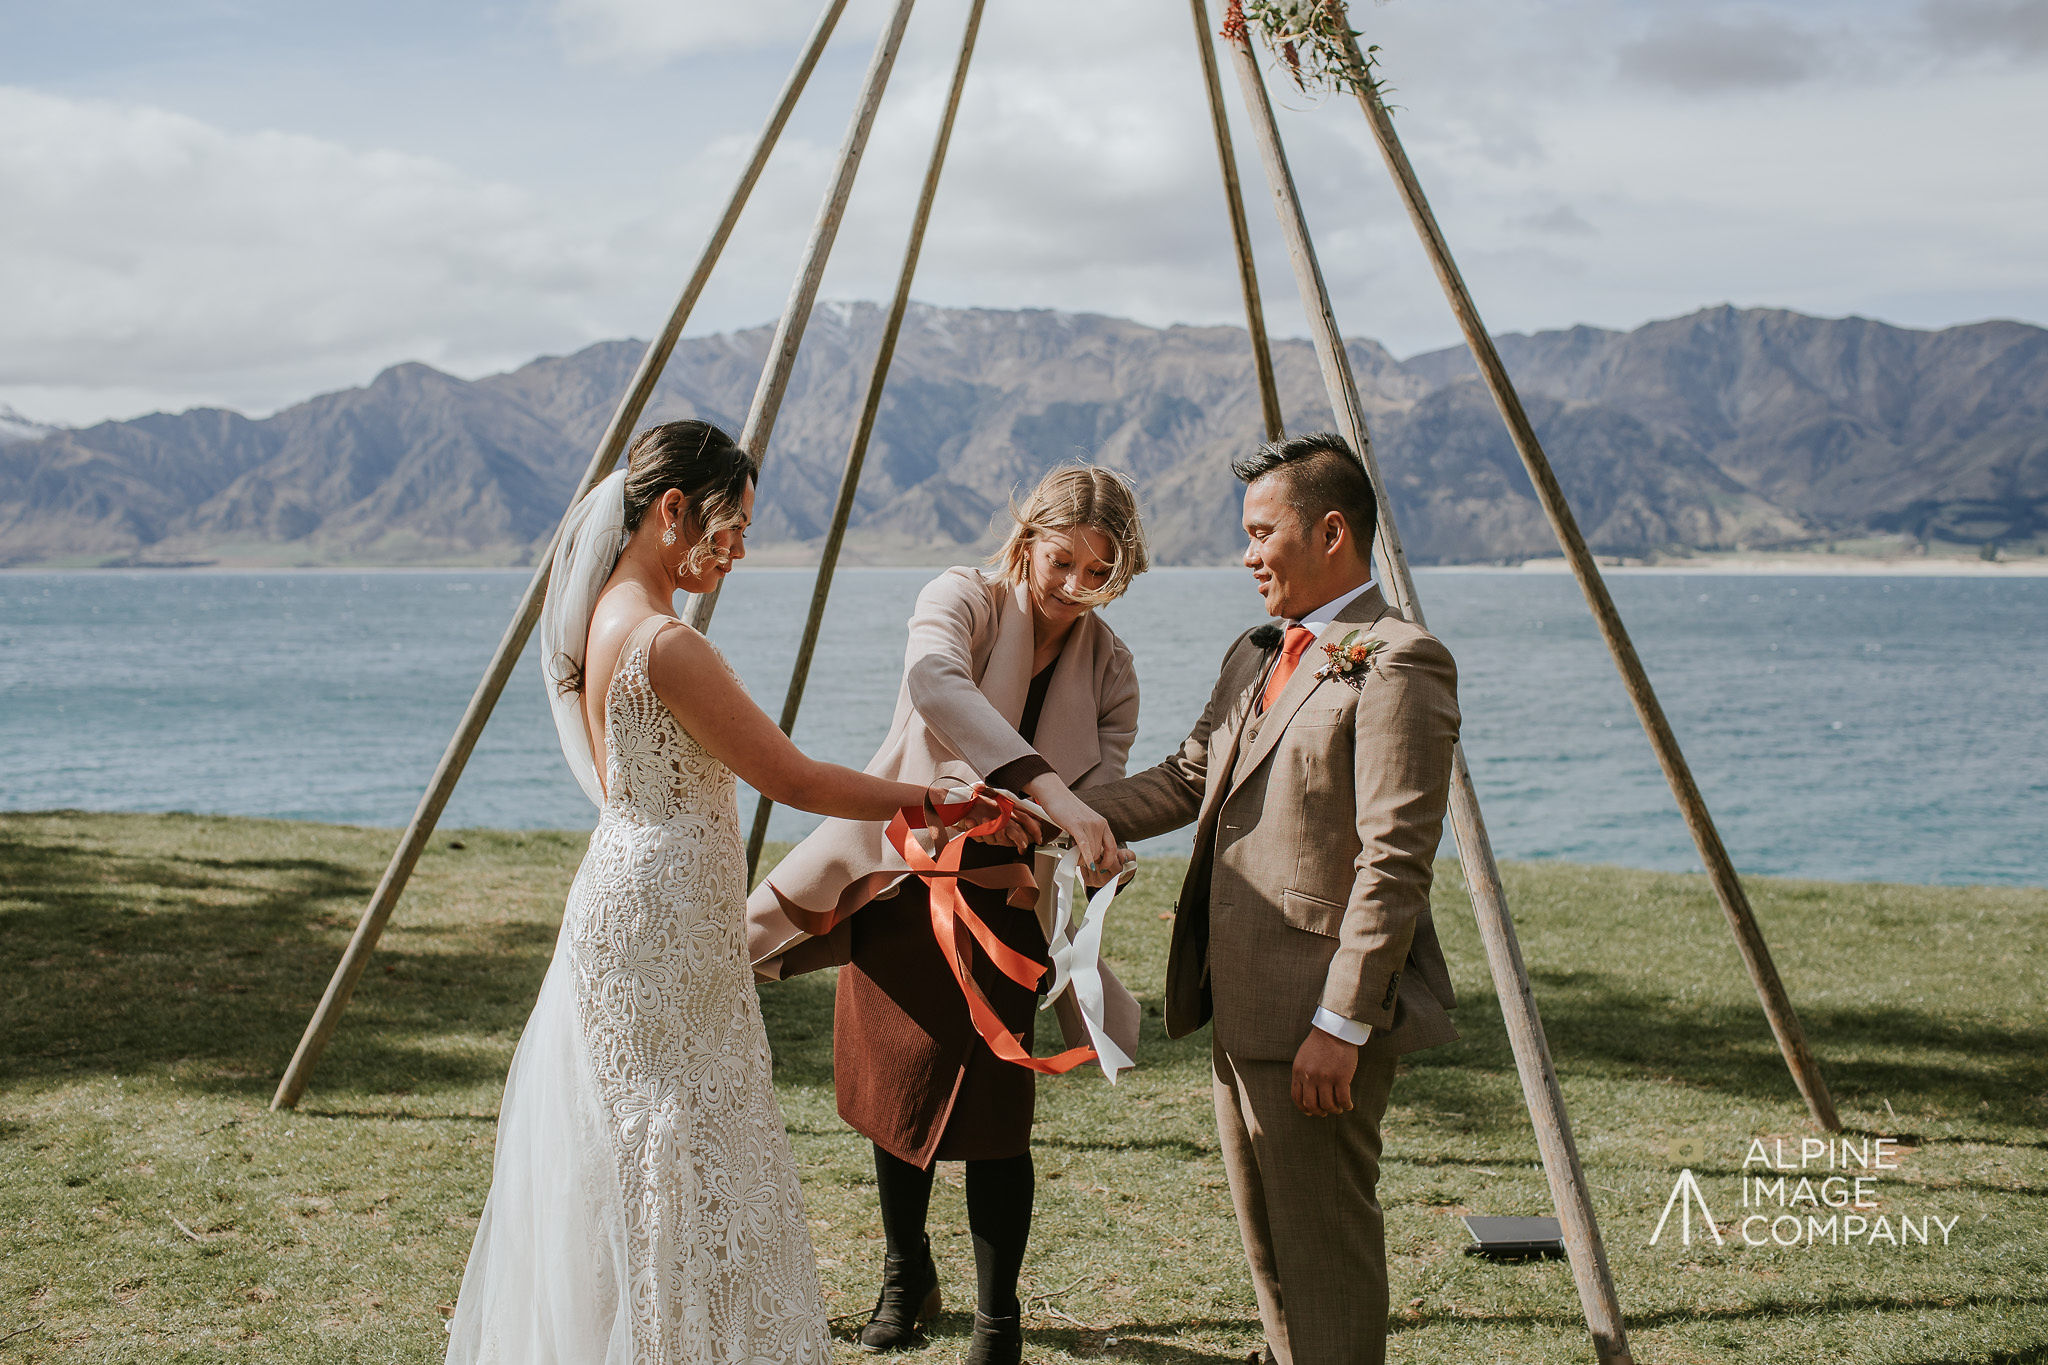 hand fasting with ribbons during wedding ceremony at The Camp, Wanaka, New Zealand